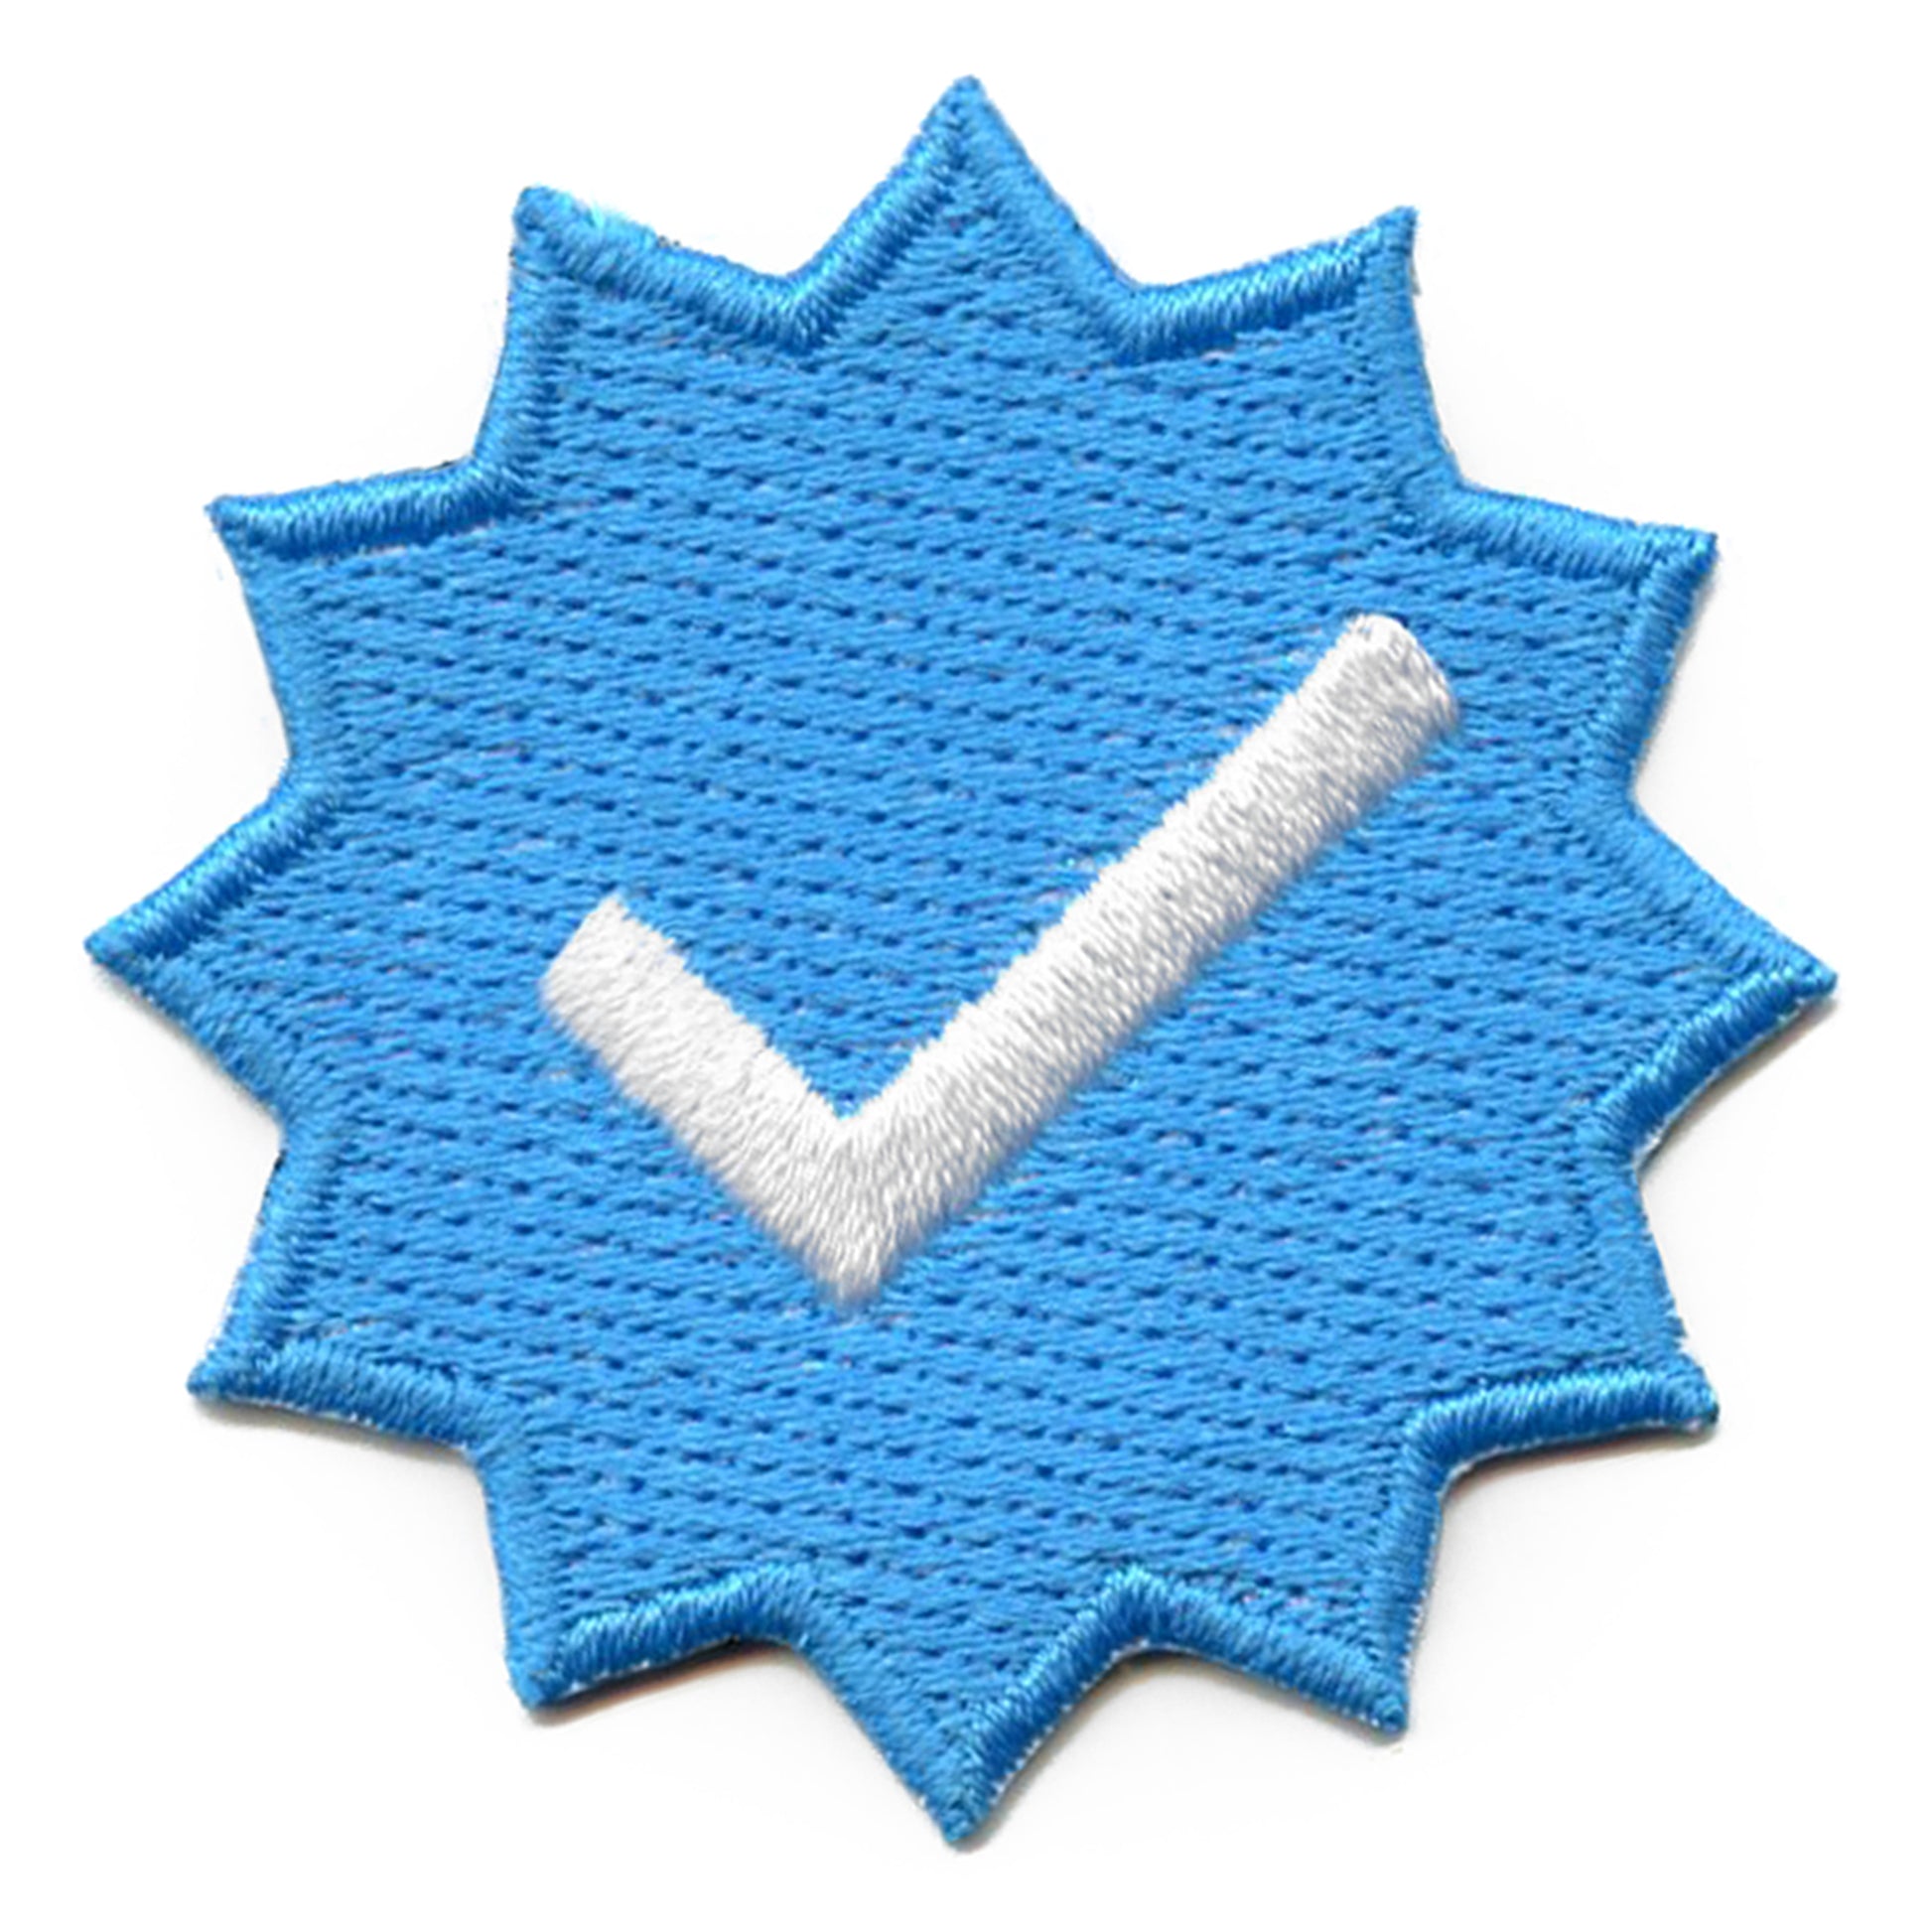 Check Mark Sign Patch Good Job Symbol Embroidered Iron On